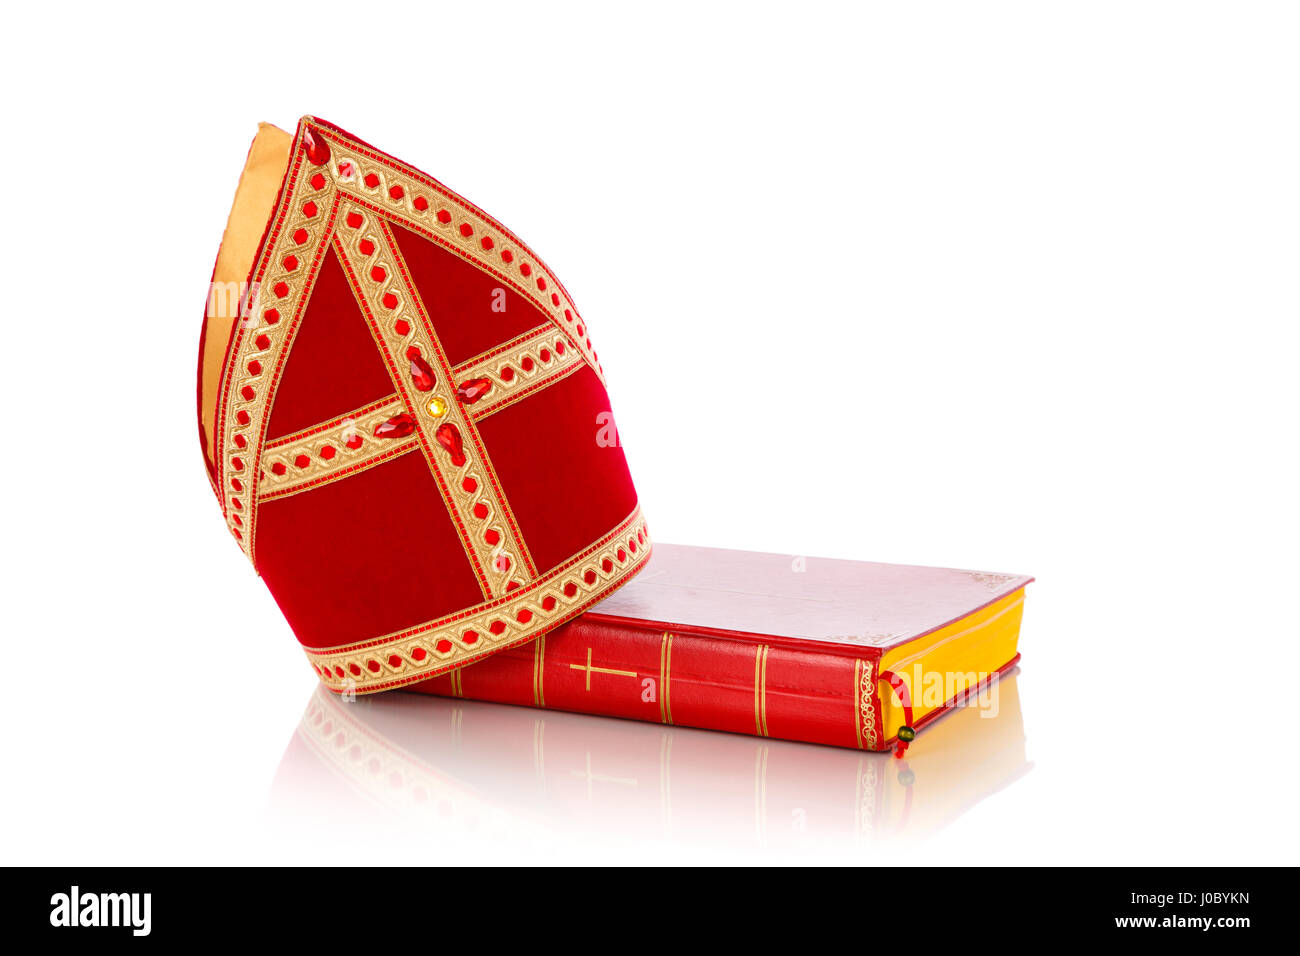 Mitre or mijter and book of Sinterklaas. Isolated on white backgroud. Part  of a dutch sancta tradition Stock Photo - Alamy